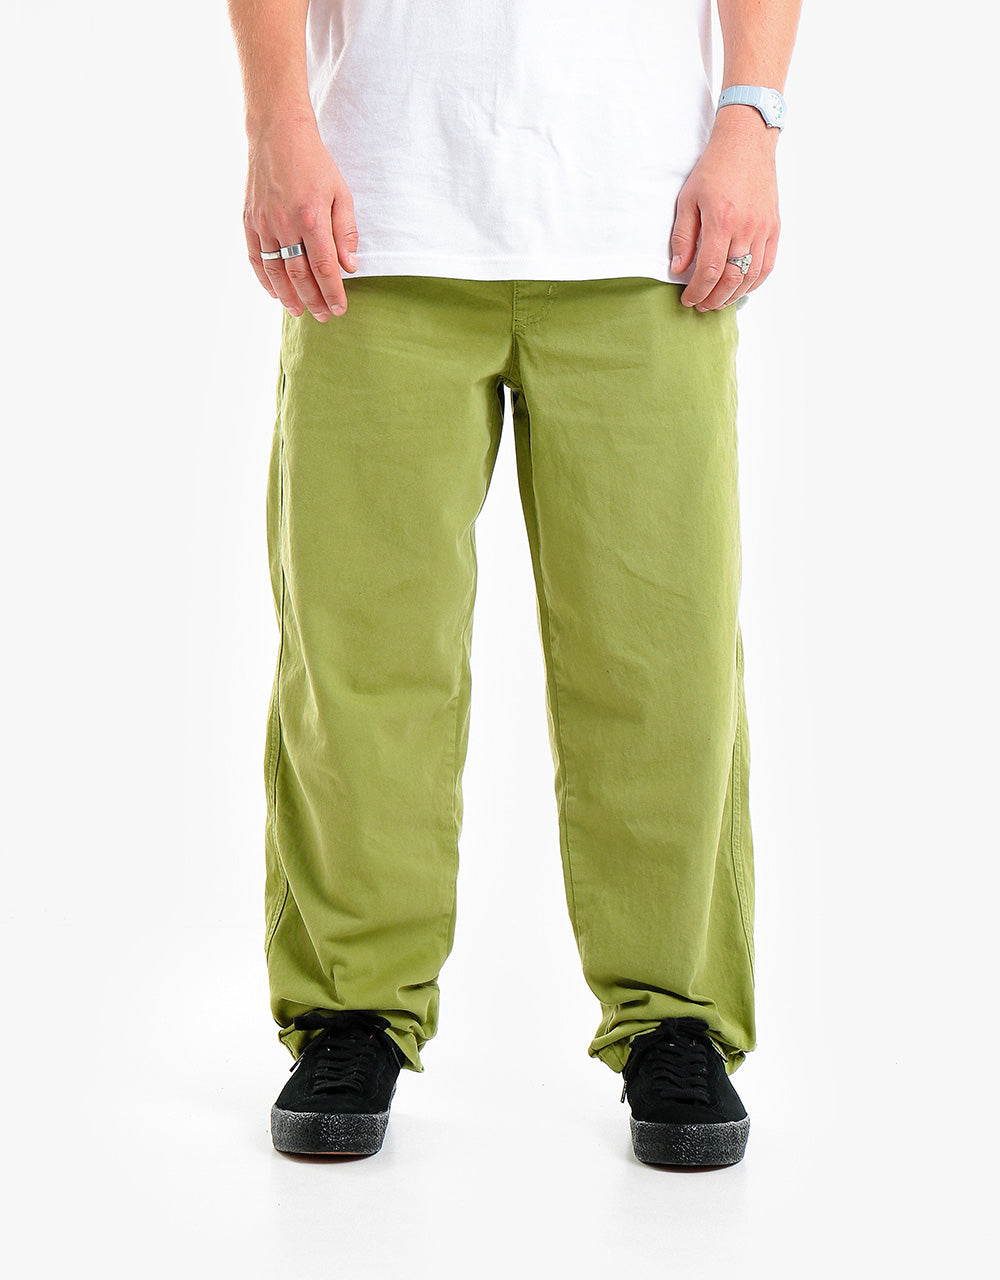 Route One Organic Baggy Pants - Olive